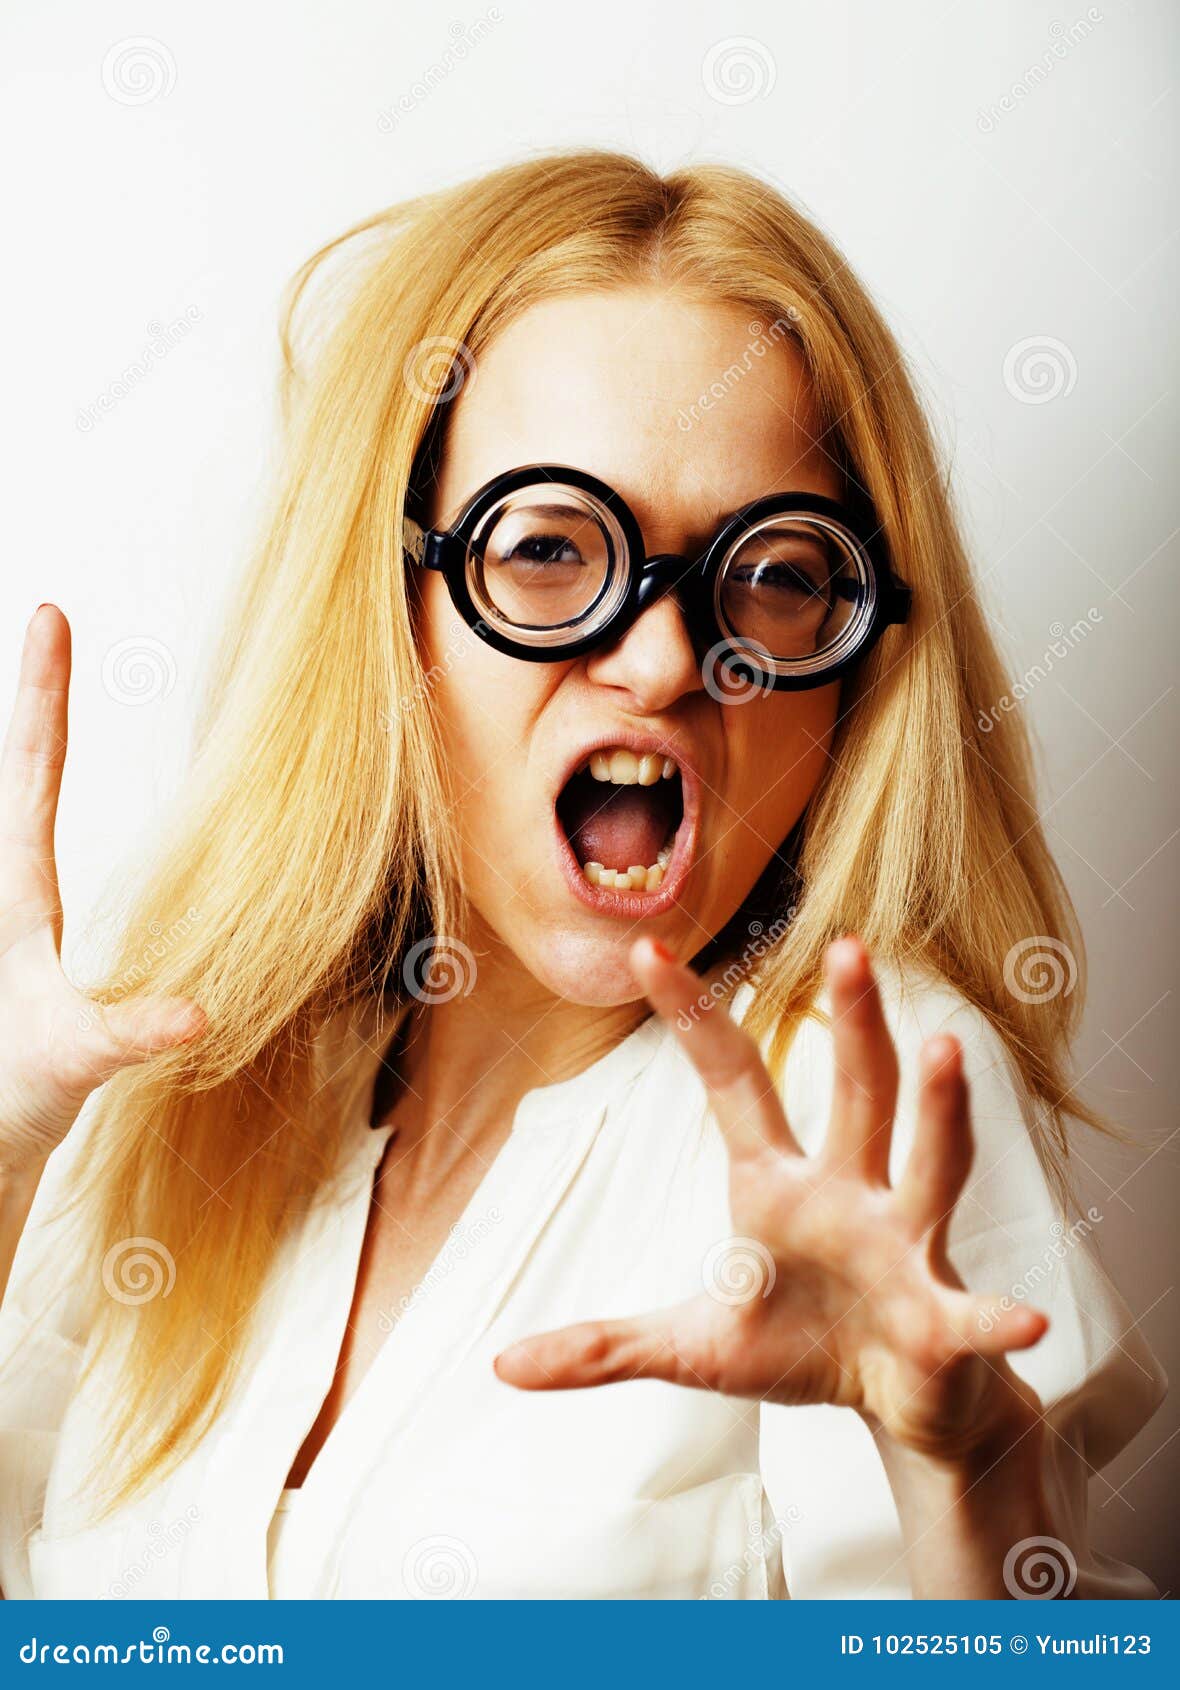 Bookworm Cute Young Blond Woman In Glasses Blond Hair Teenage Goofy 